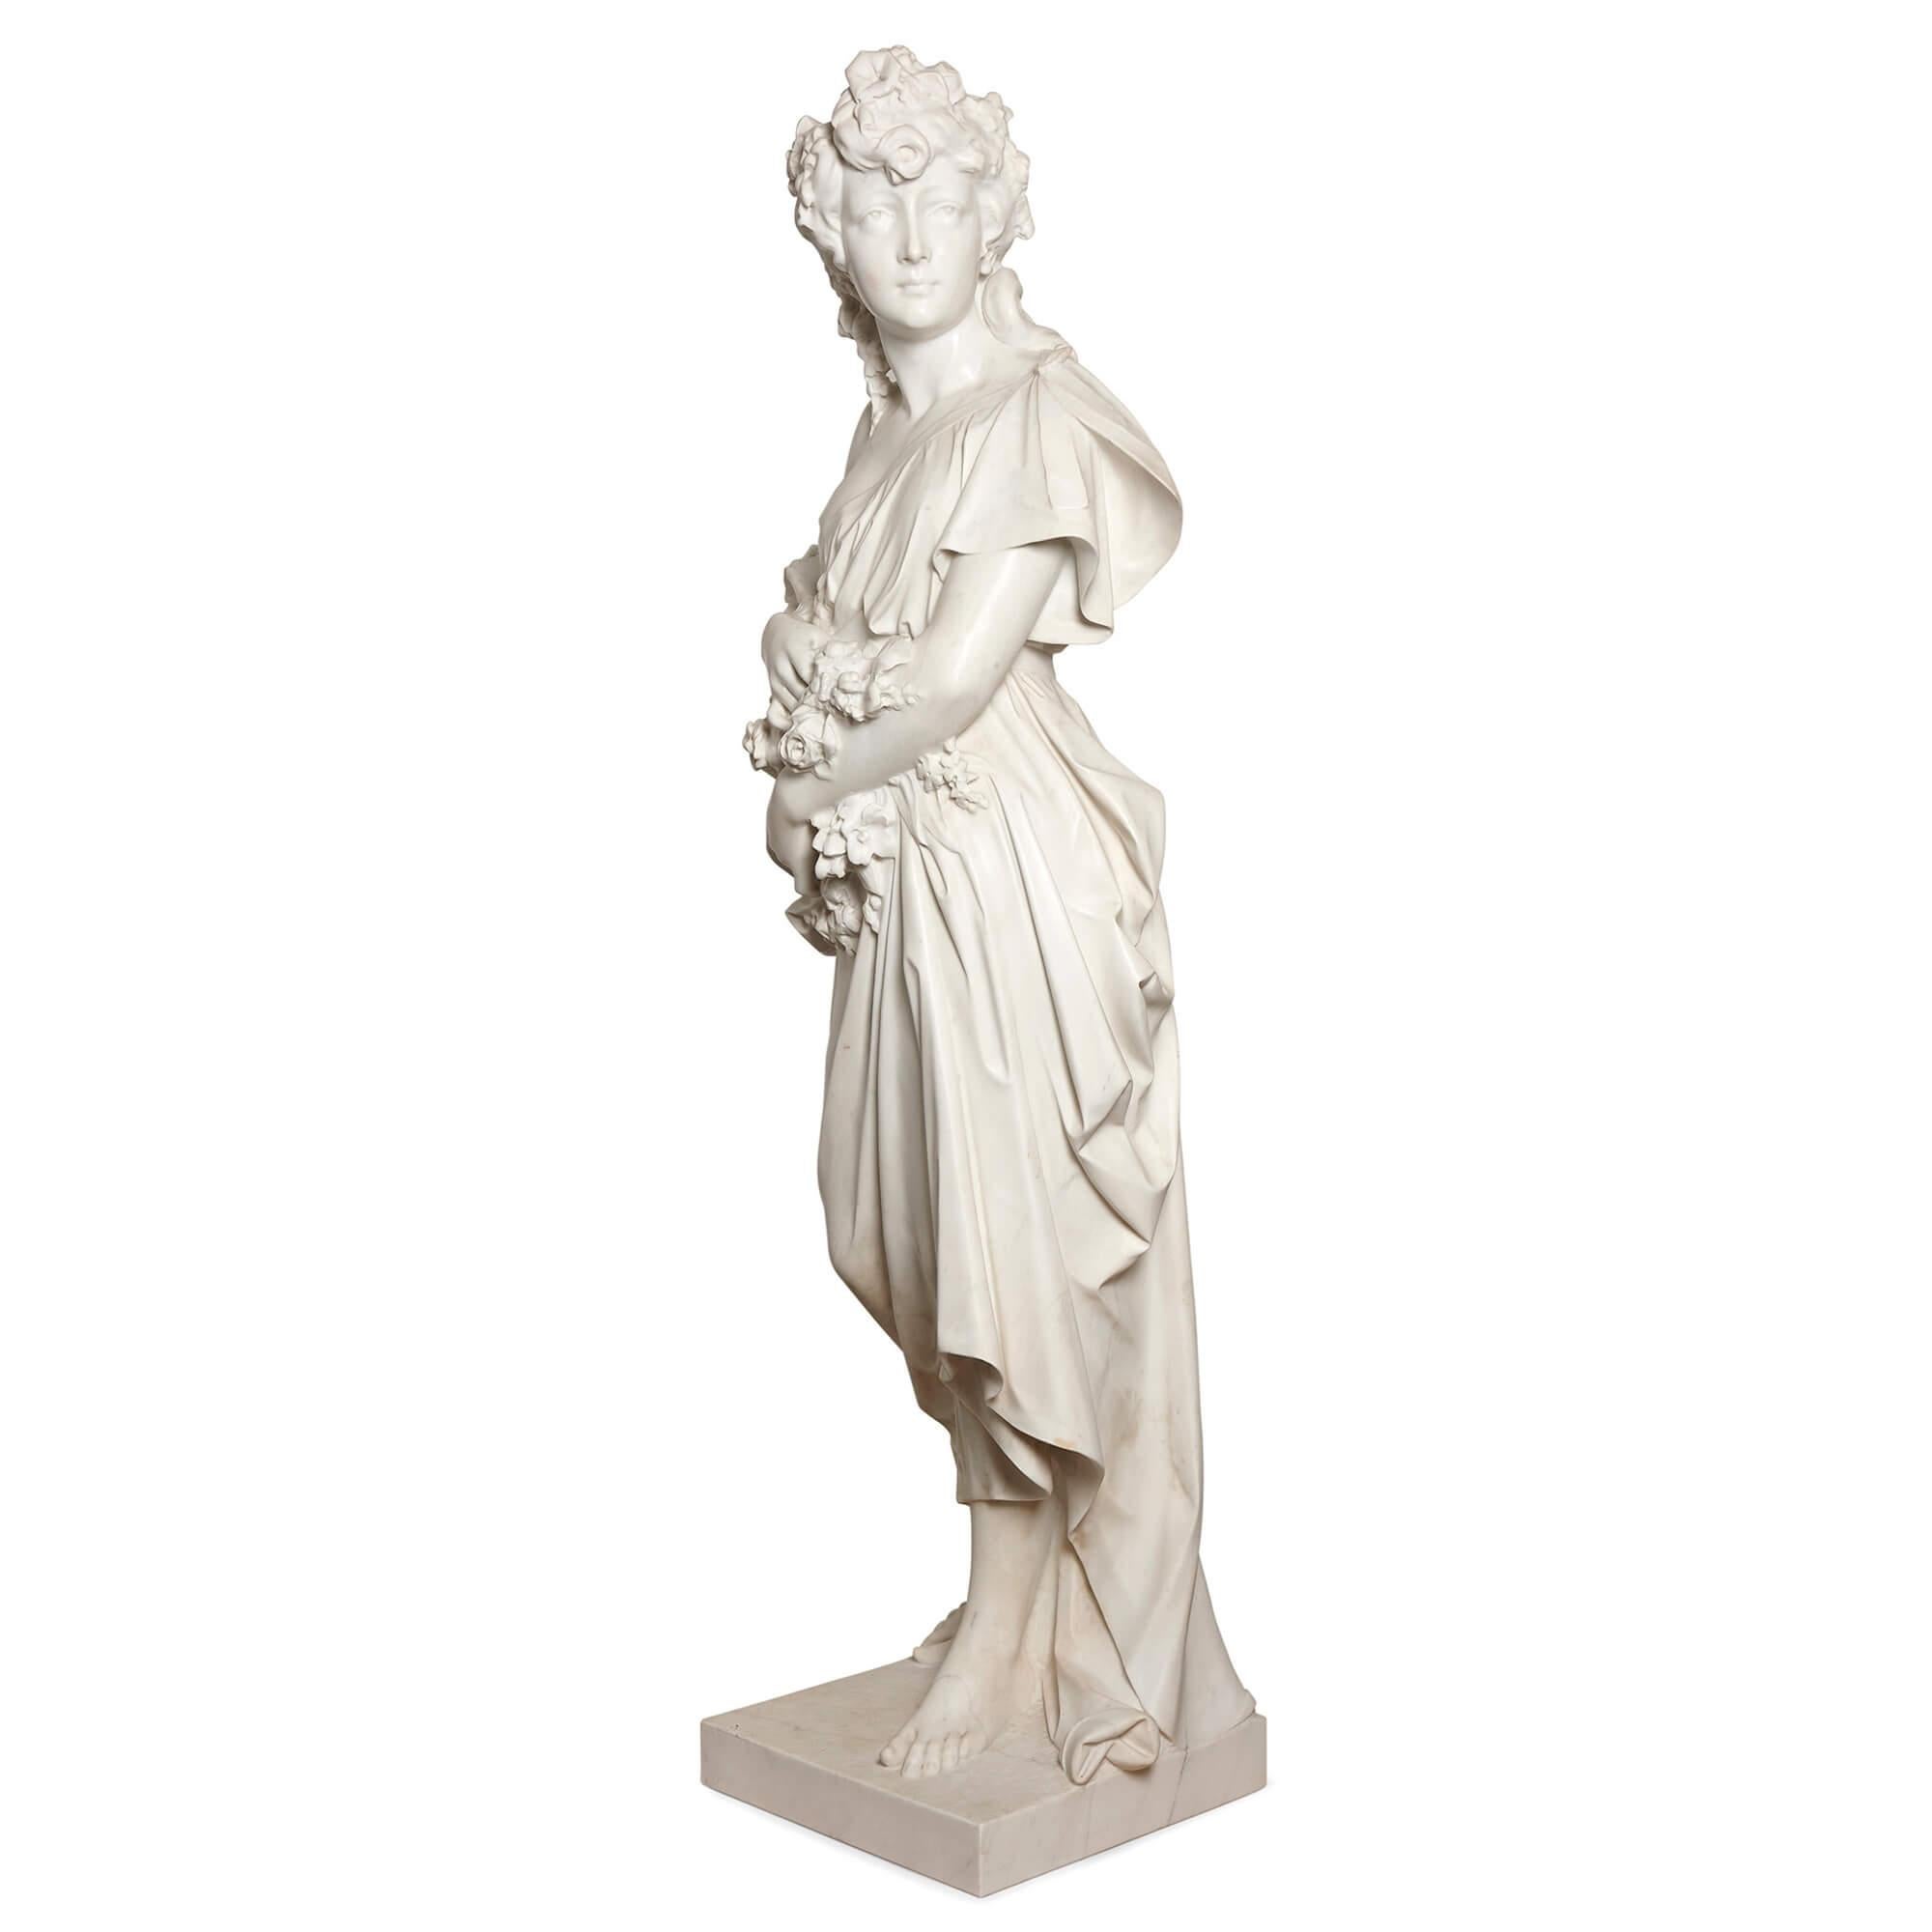 Life-size marble sculpture of Spring by Antonio Frilli
Italian, late 19th century
Height 159cm, width 47cm, depth 40cm

This superb sculpture is the work of Antonio Frilli, a renowned Italian artist active in the late 19th century, who founded